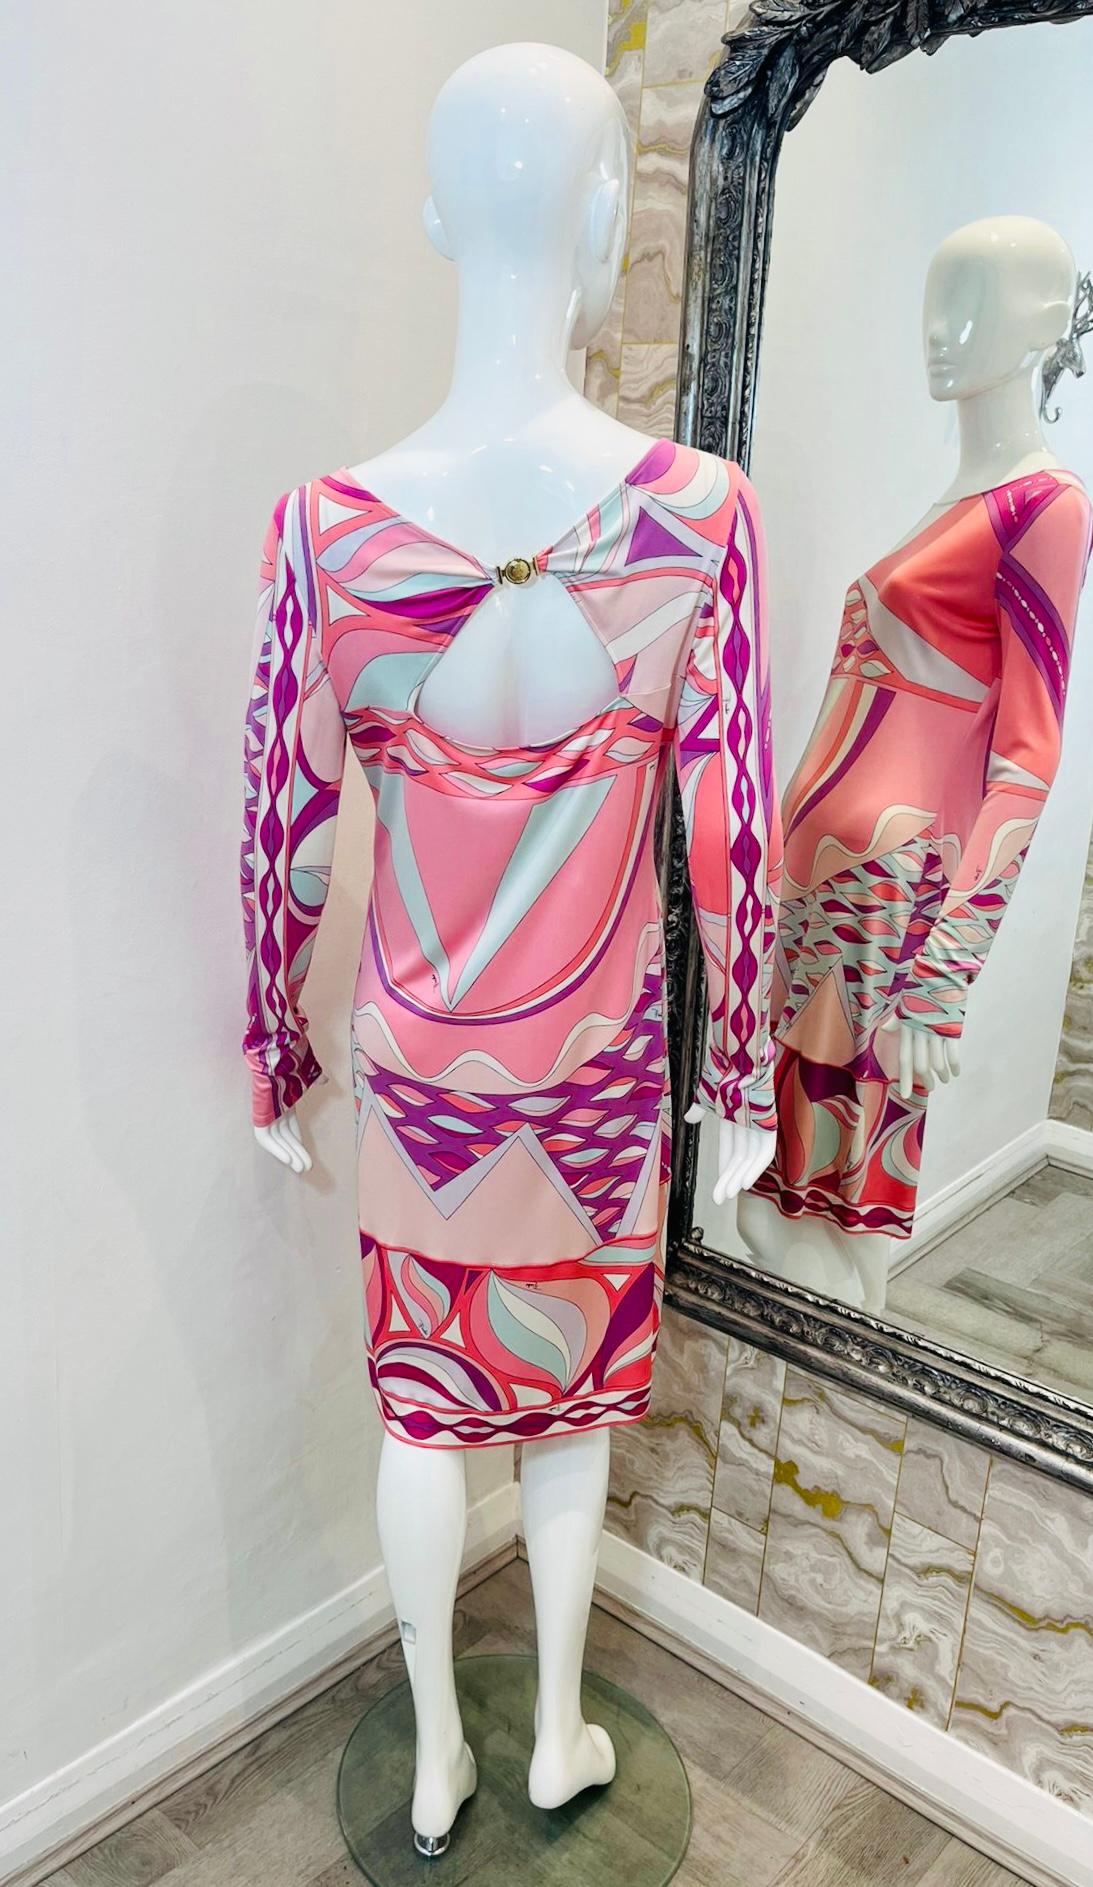 Emilio Pucci Abstract Print Silk Dress In Excellent Condition For Sale In London, GB